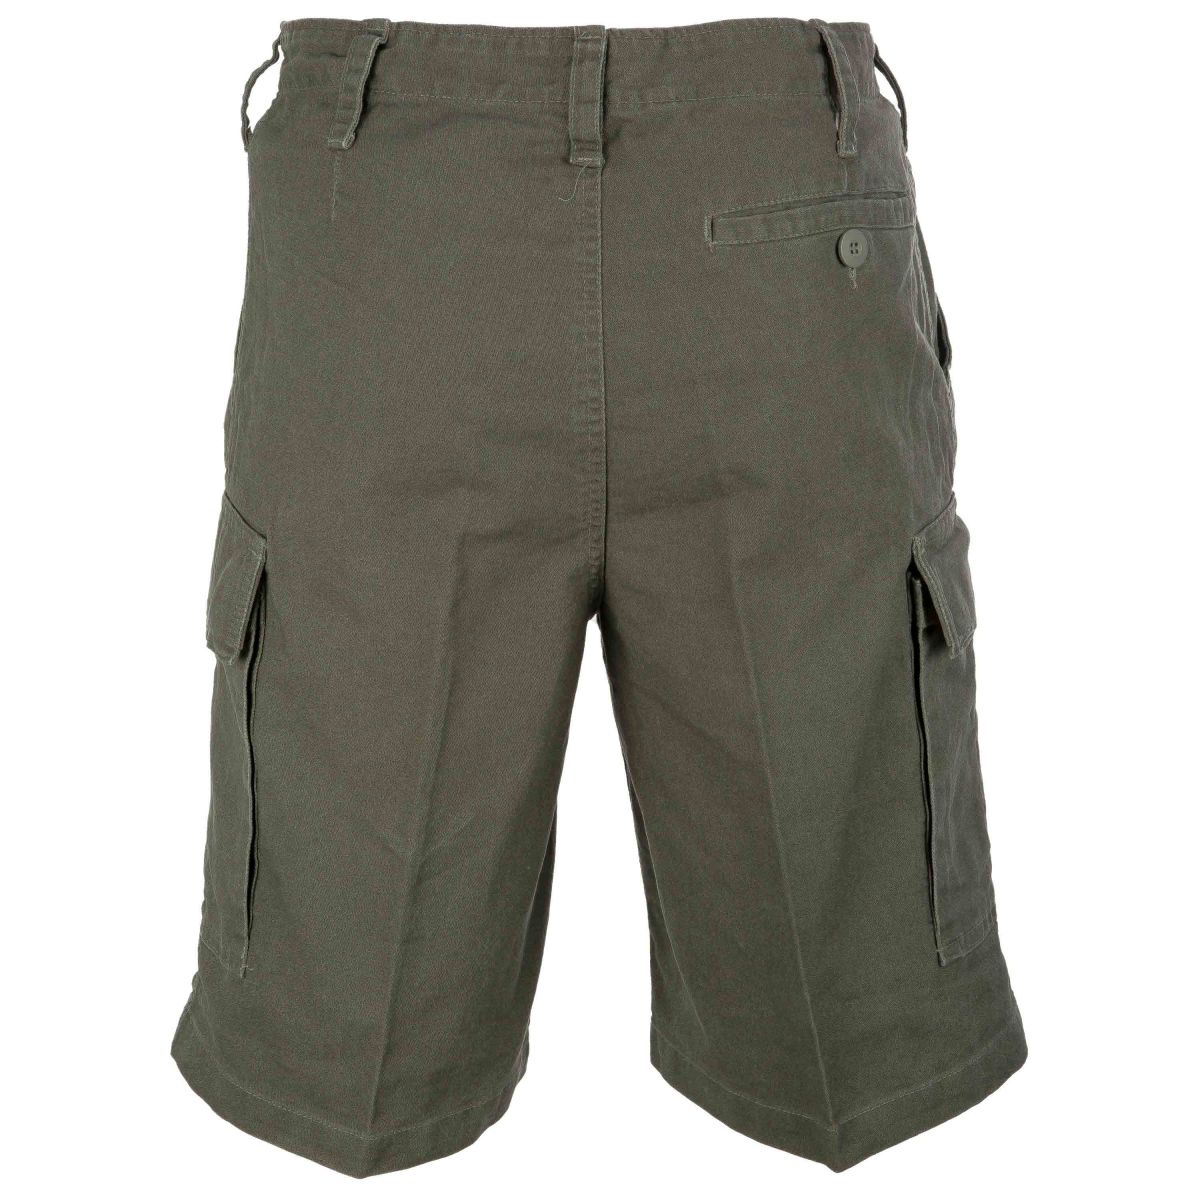 Purchase the Moleskin Shorts Mil-Tec olive by ASMC